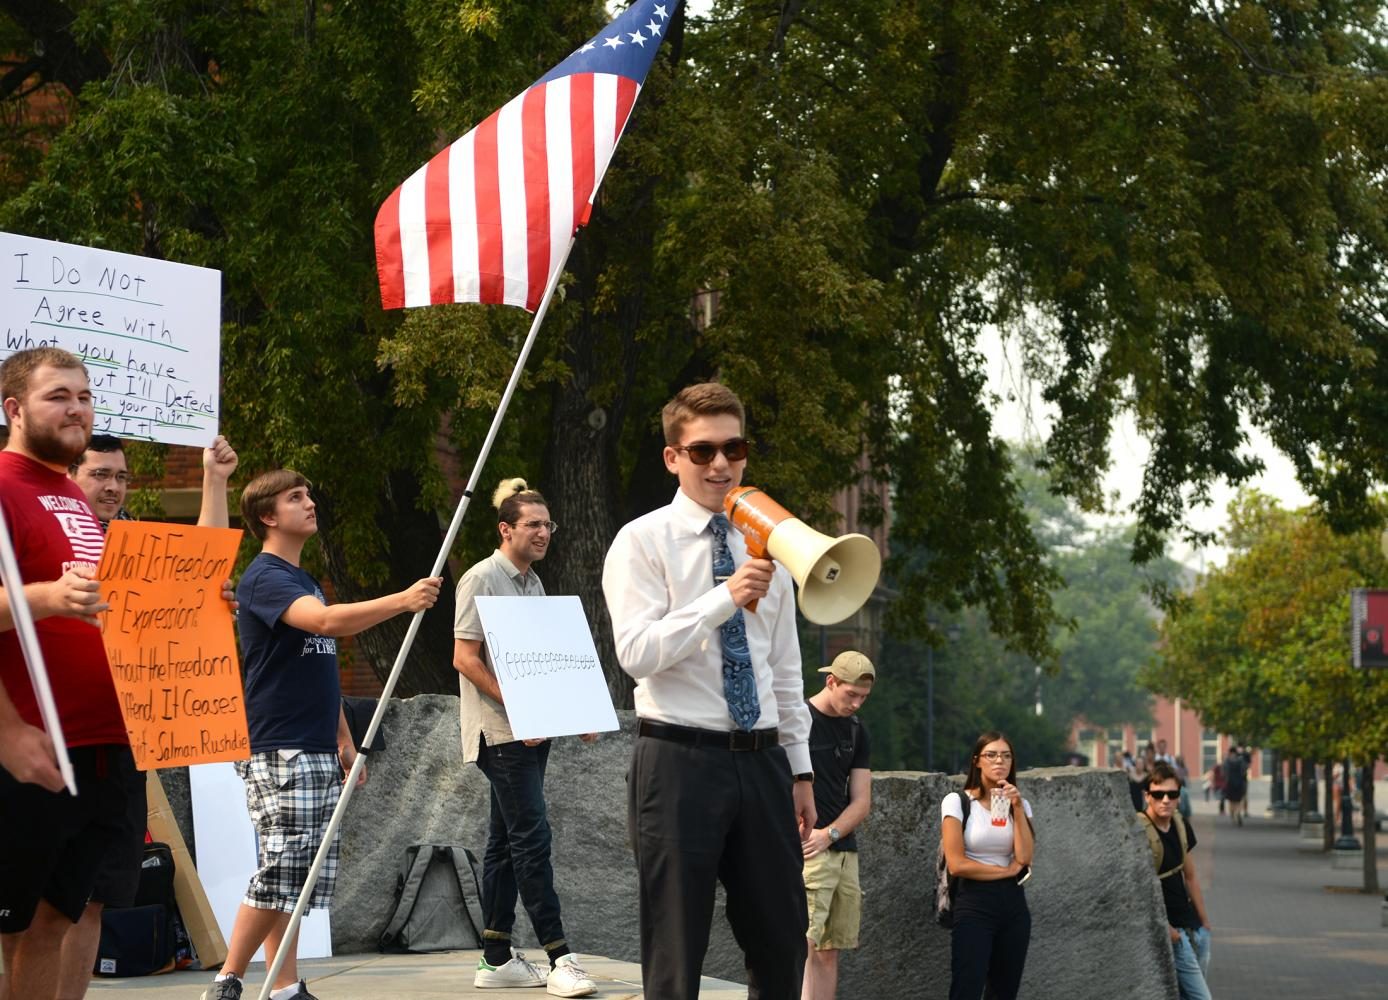 Students had the opportunity to speak on whatever they wanted at the Free Speech Rally
on Wednesday.